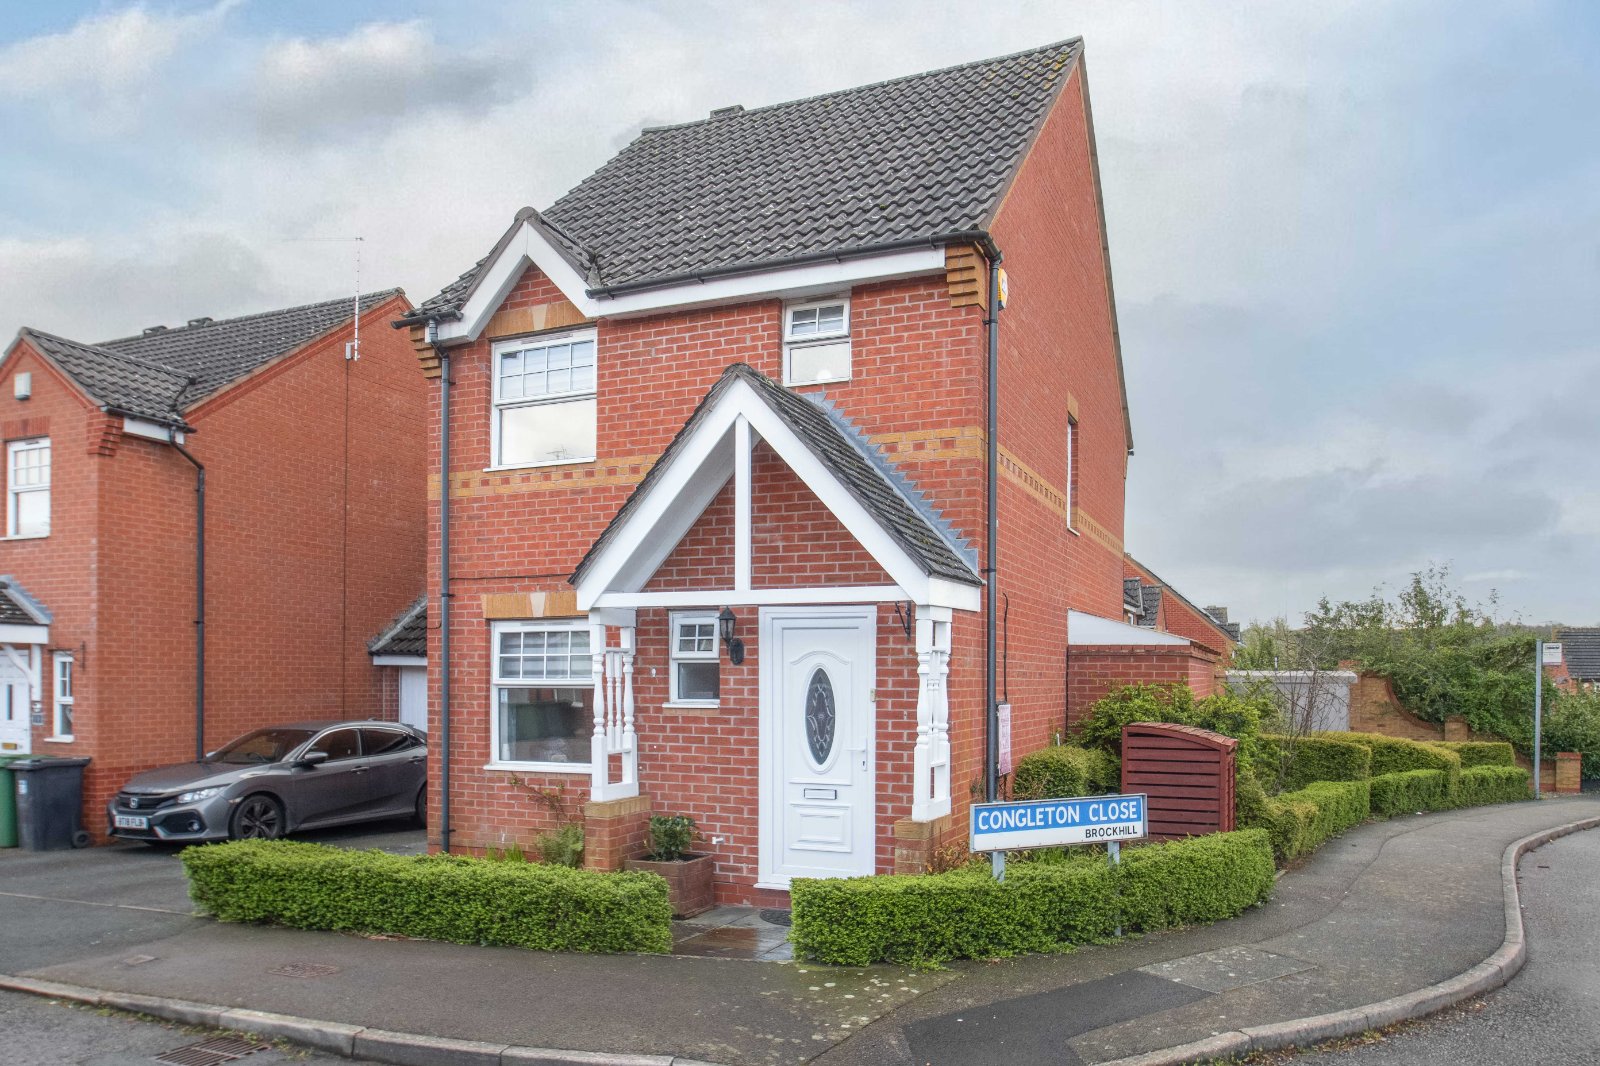 3 bed house for sale in Congleton Close, Brockhill - Property Image 1